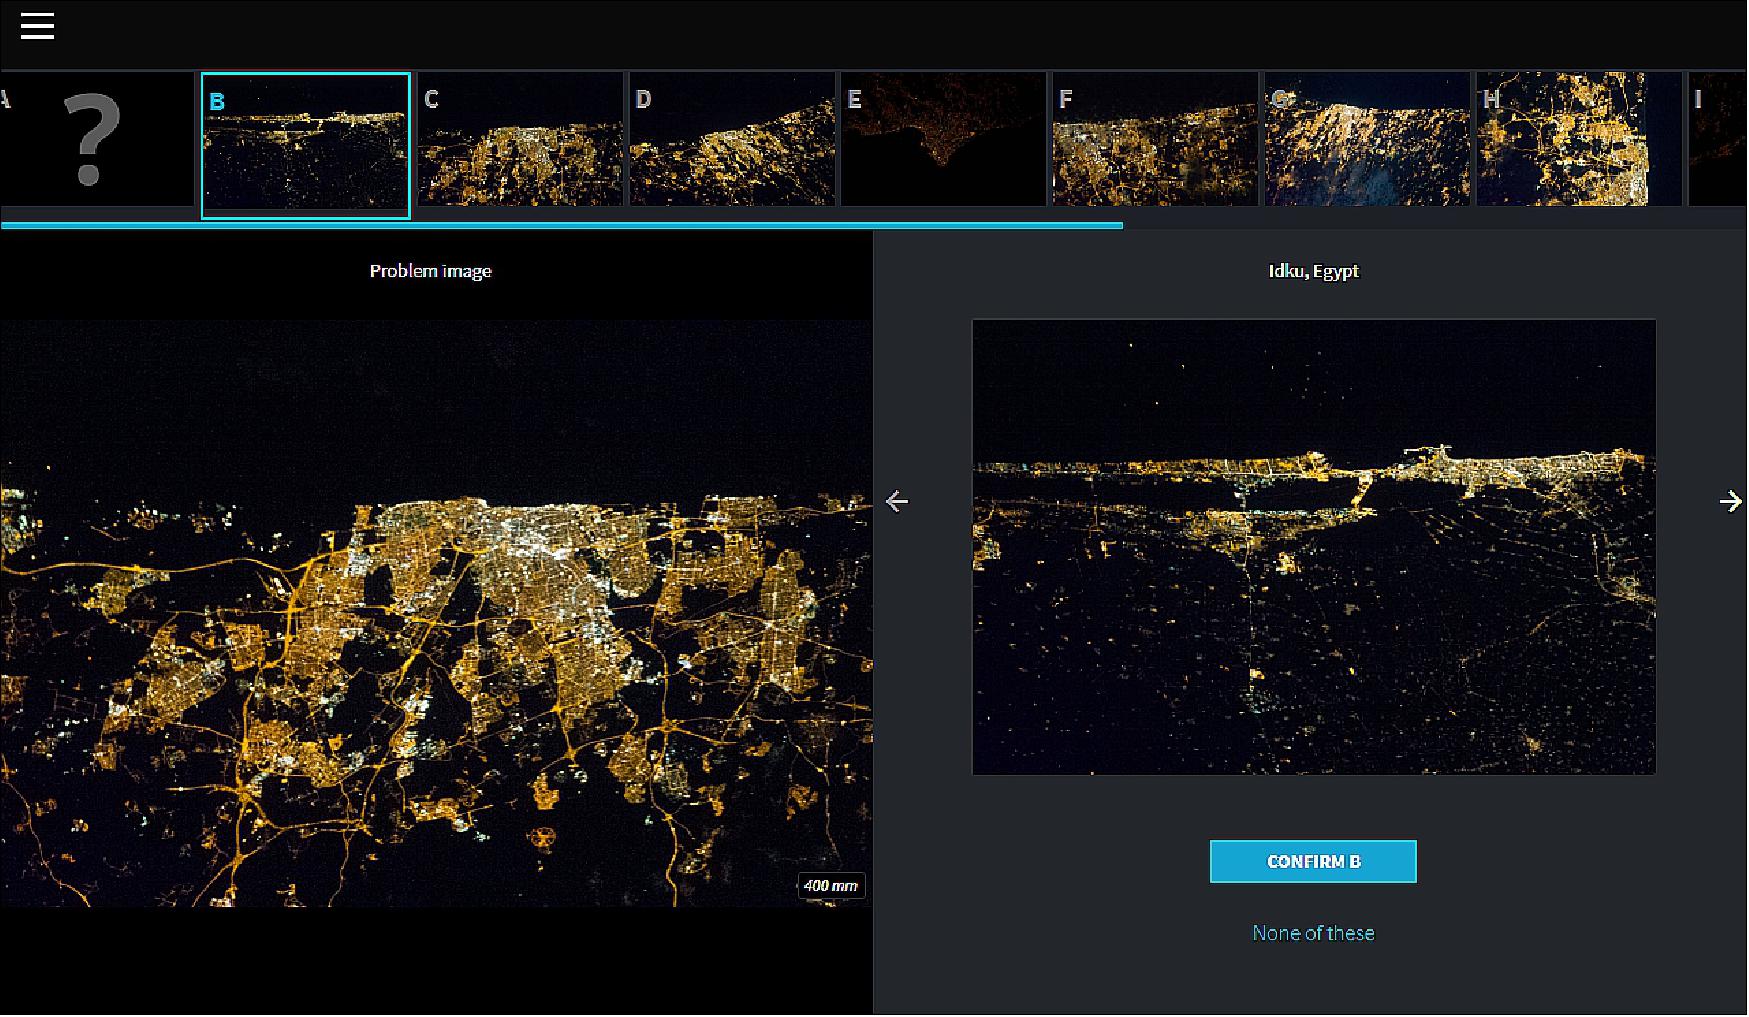 Figure 39: Lost at Night interface. To tackle light pollution citizen scientists are urged to help map out the problem on their smartphones by identifying images of cities taken from space. Lost at Night uses the power of citizen science to match images and identify the location of the astronauts’ photographs online. Users are presented an image from an unknown city and they must try to find the best match by comparing it with several options. This helps the study of light pollution and how it affects life on our planet (image credit: Lost at Night)